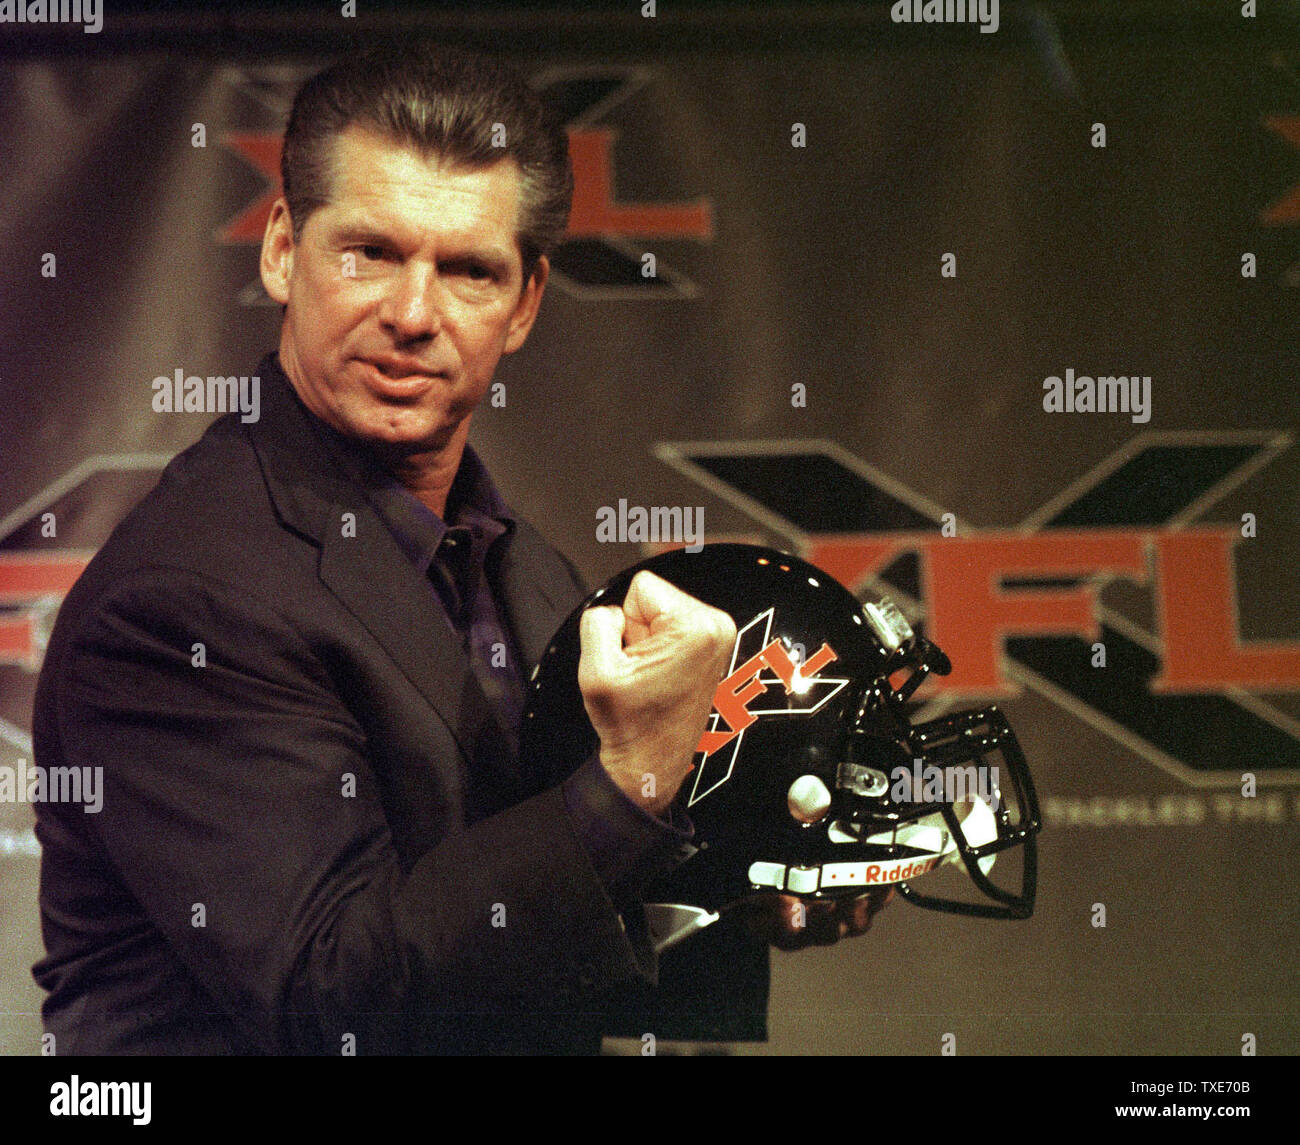 NYP2000020306 - 03 FEBRUARY 2000 - NEW YORK, NEW YORK, USA: Vince McMahon, Chairman of the World Wrestling Federation announces, February 3, the formation of the XFL, a new football league scheduled to start in February 2001.  rg/ep/Ezio Petersen   UPI Stock Photo